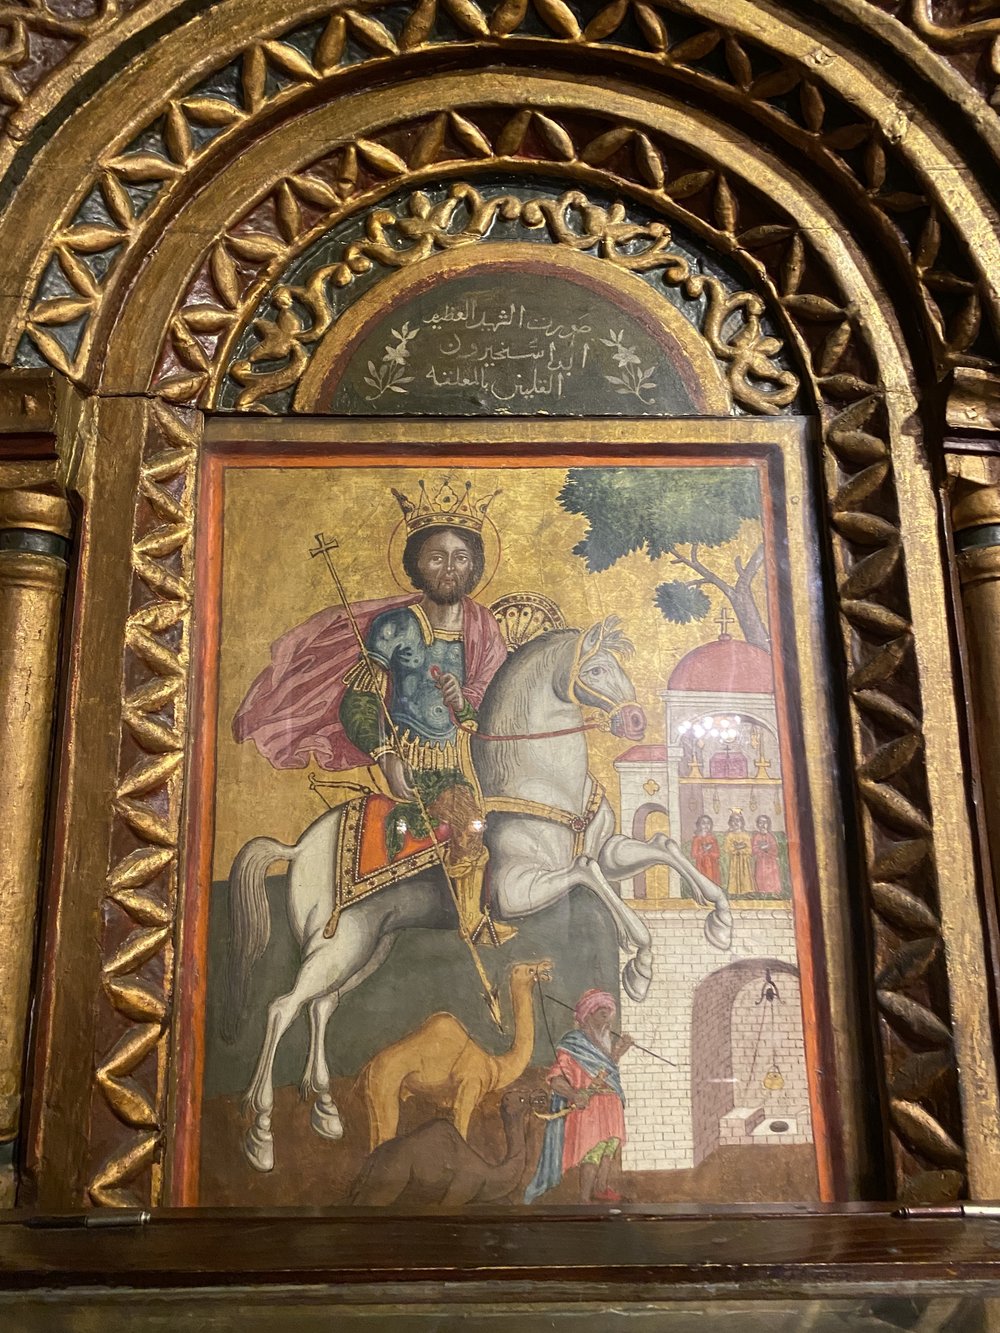 A painting dedicated to one of the Martyred Saints